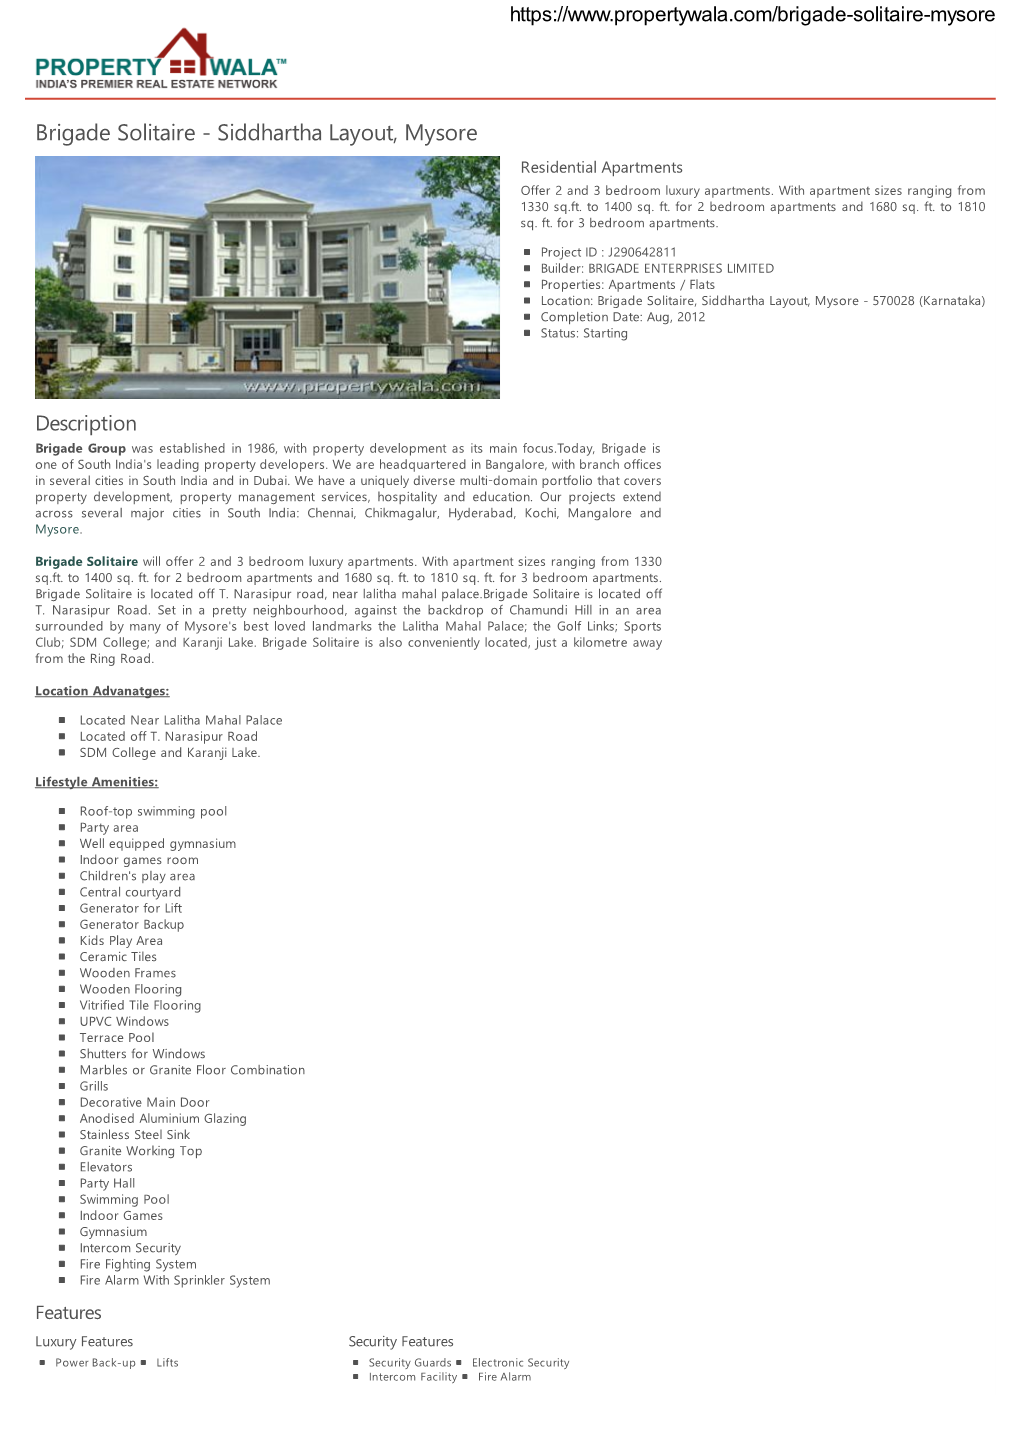 Brigade Solitaire - Siddhartha Layout, Mysore Residential Apartments Offer 2 and 3 Bedroom Luxury Apartments